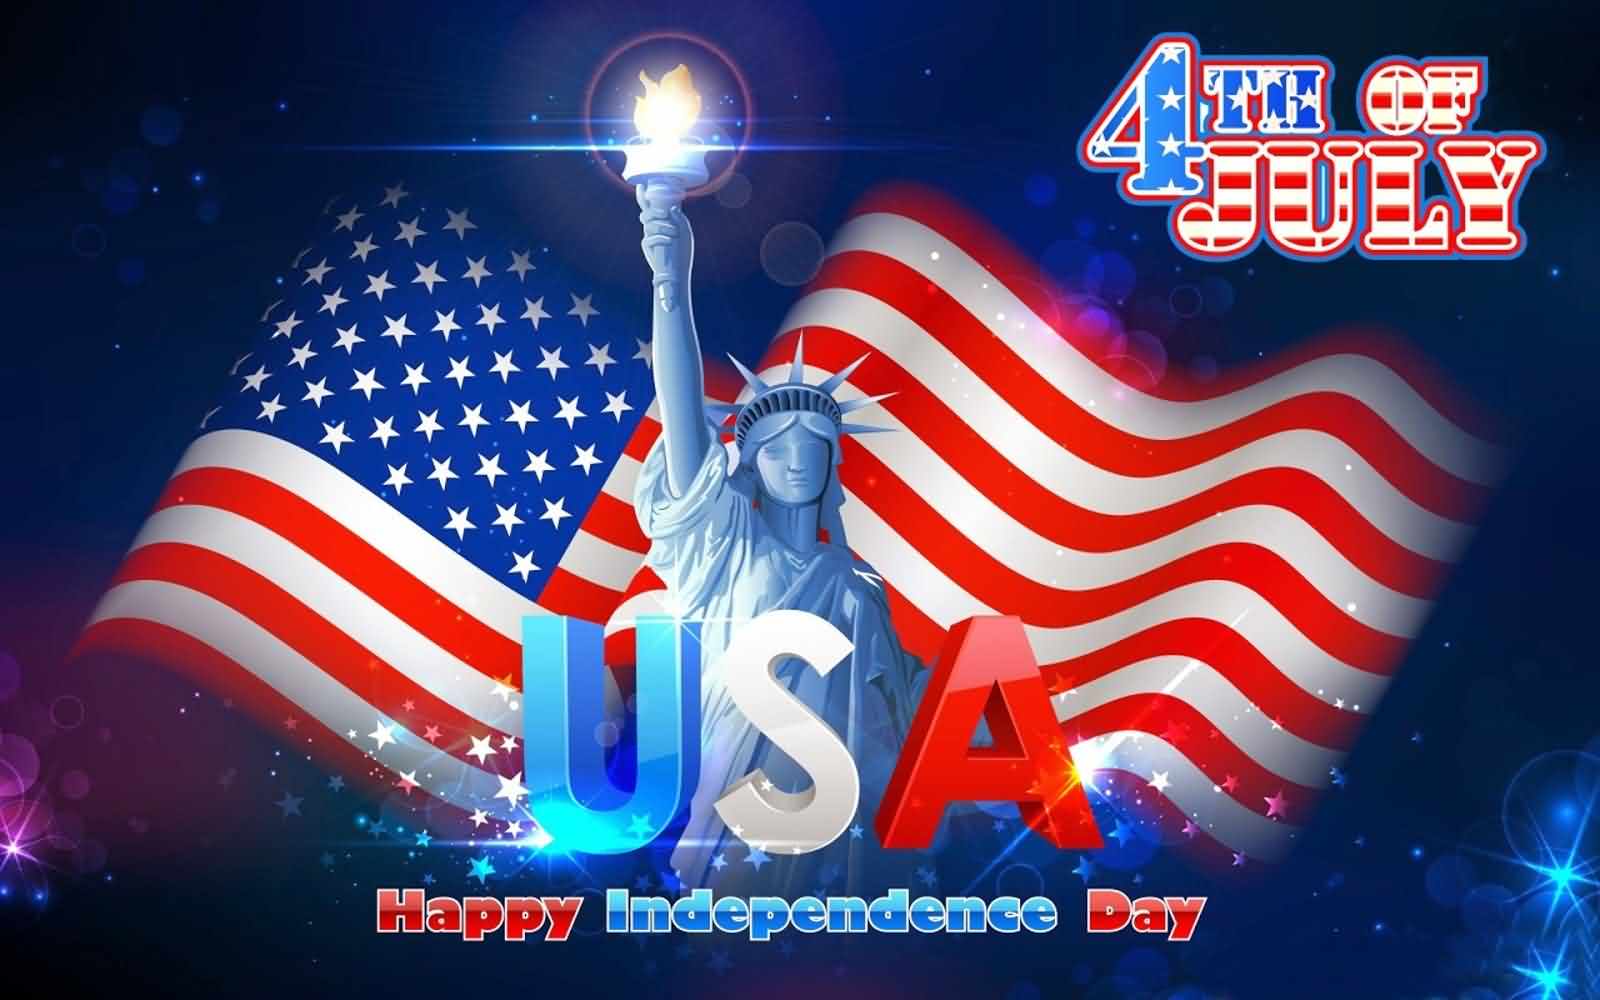 God Bless America Happy Independence Day 4th July Greetings and Wishes Wallpaper